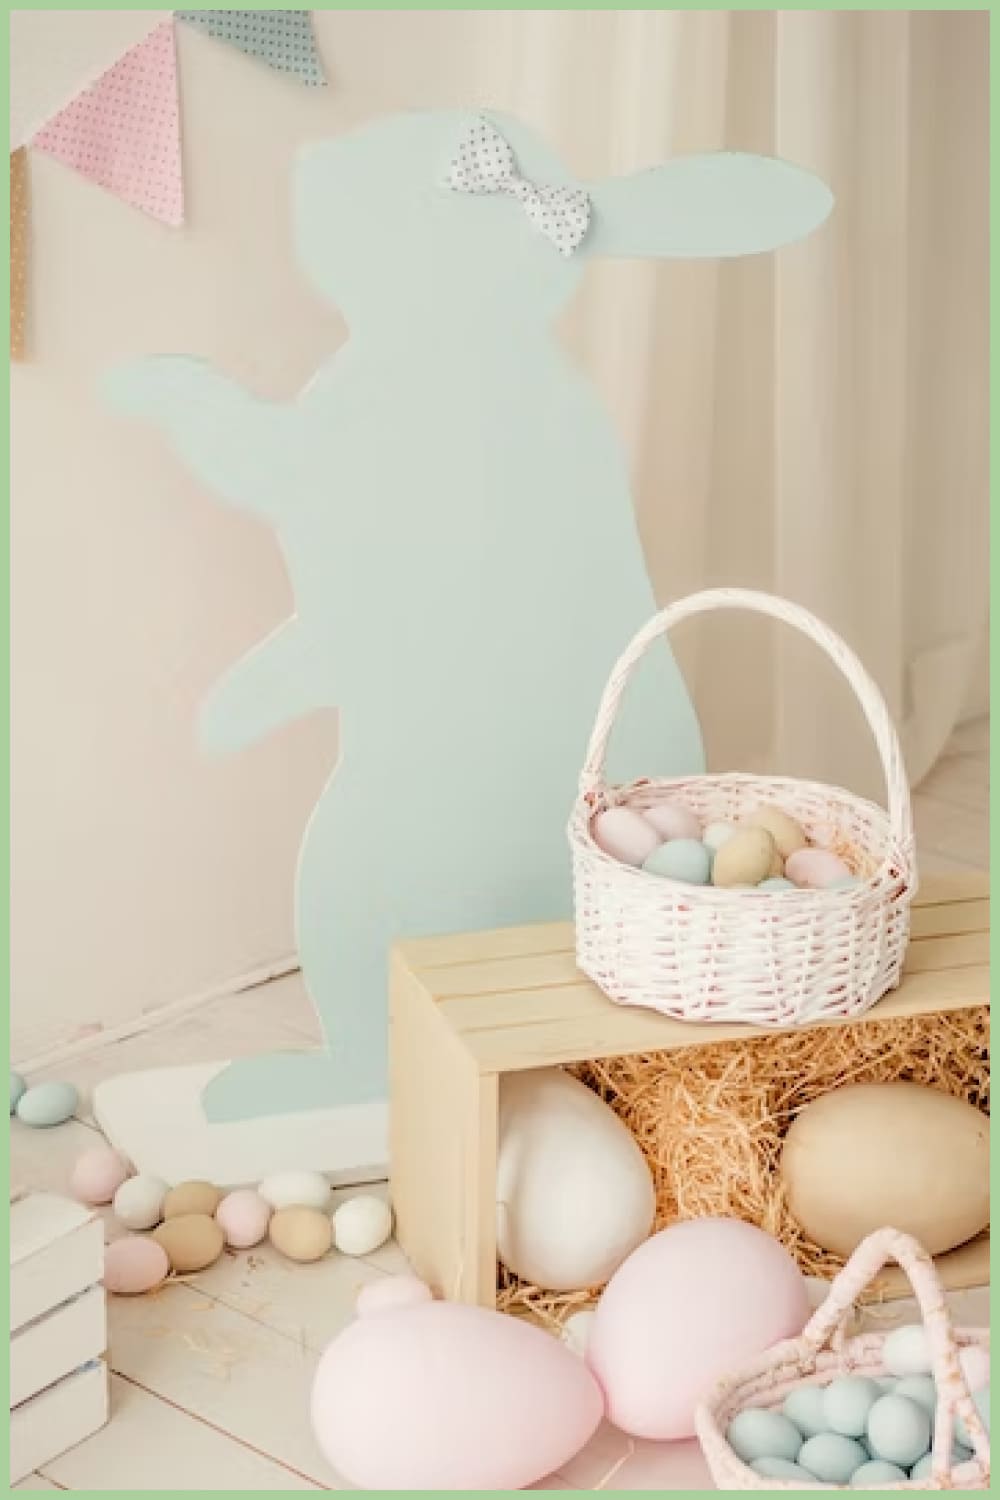 Basket with Easter eggs on a box with straw.